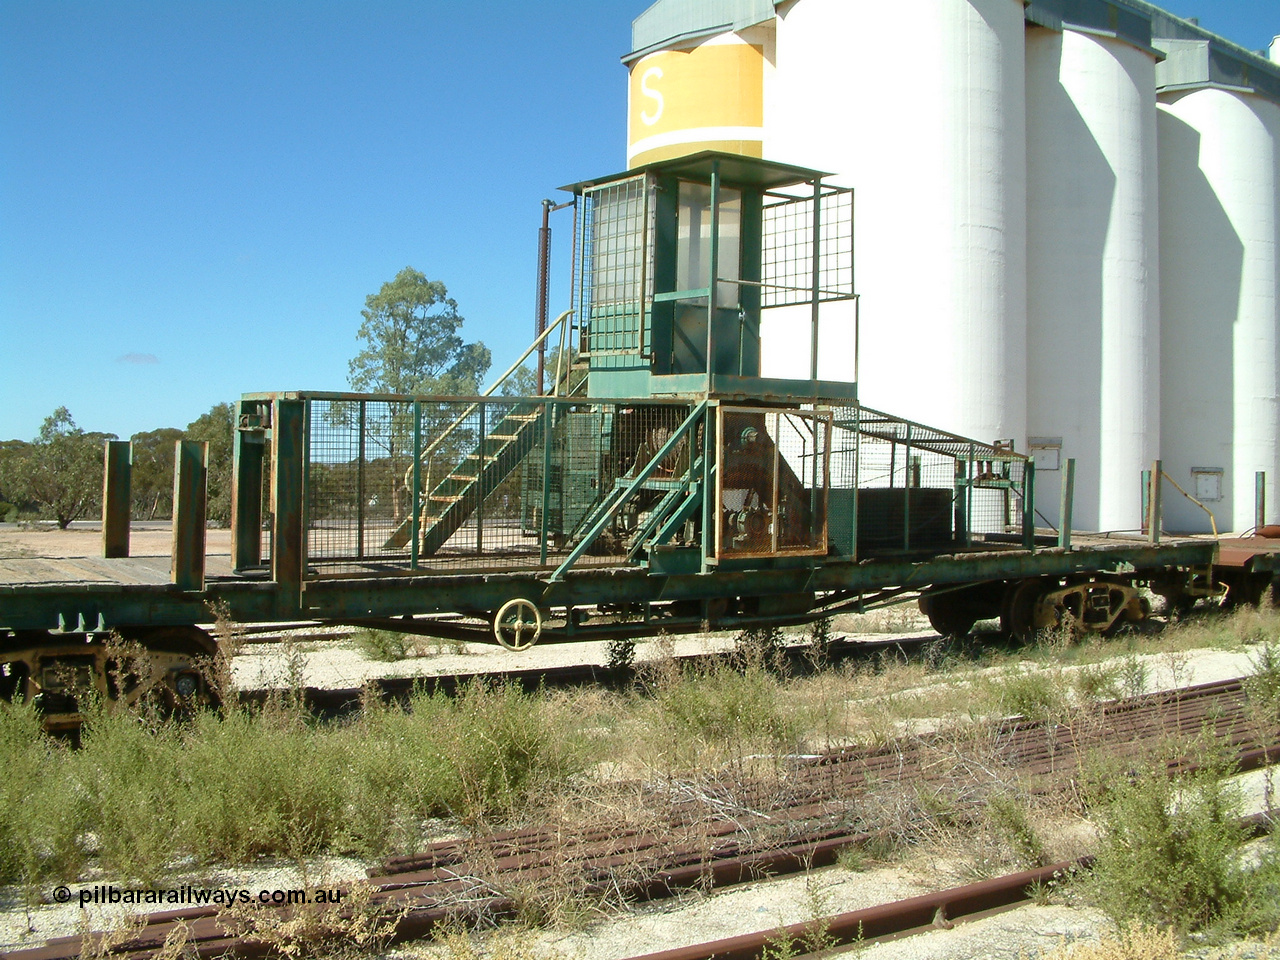 030411 110227
Kimba, rail recovery winch waggon EZWL 2, shows cabin mounted above motor and winch, built using underframe of broad gauge horse box BH 4331. To Eyre Peninsula 1992, recoded then from AZWL. Scrapped in 2005.
Keywords: EZWL-type;EZWL2;SAR-Islington-WS;BH-type;BH4331;